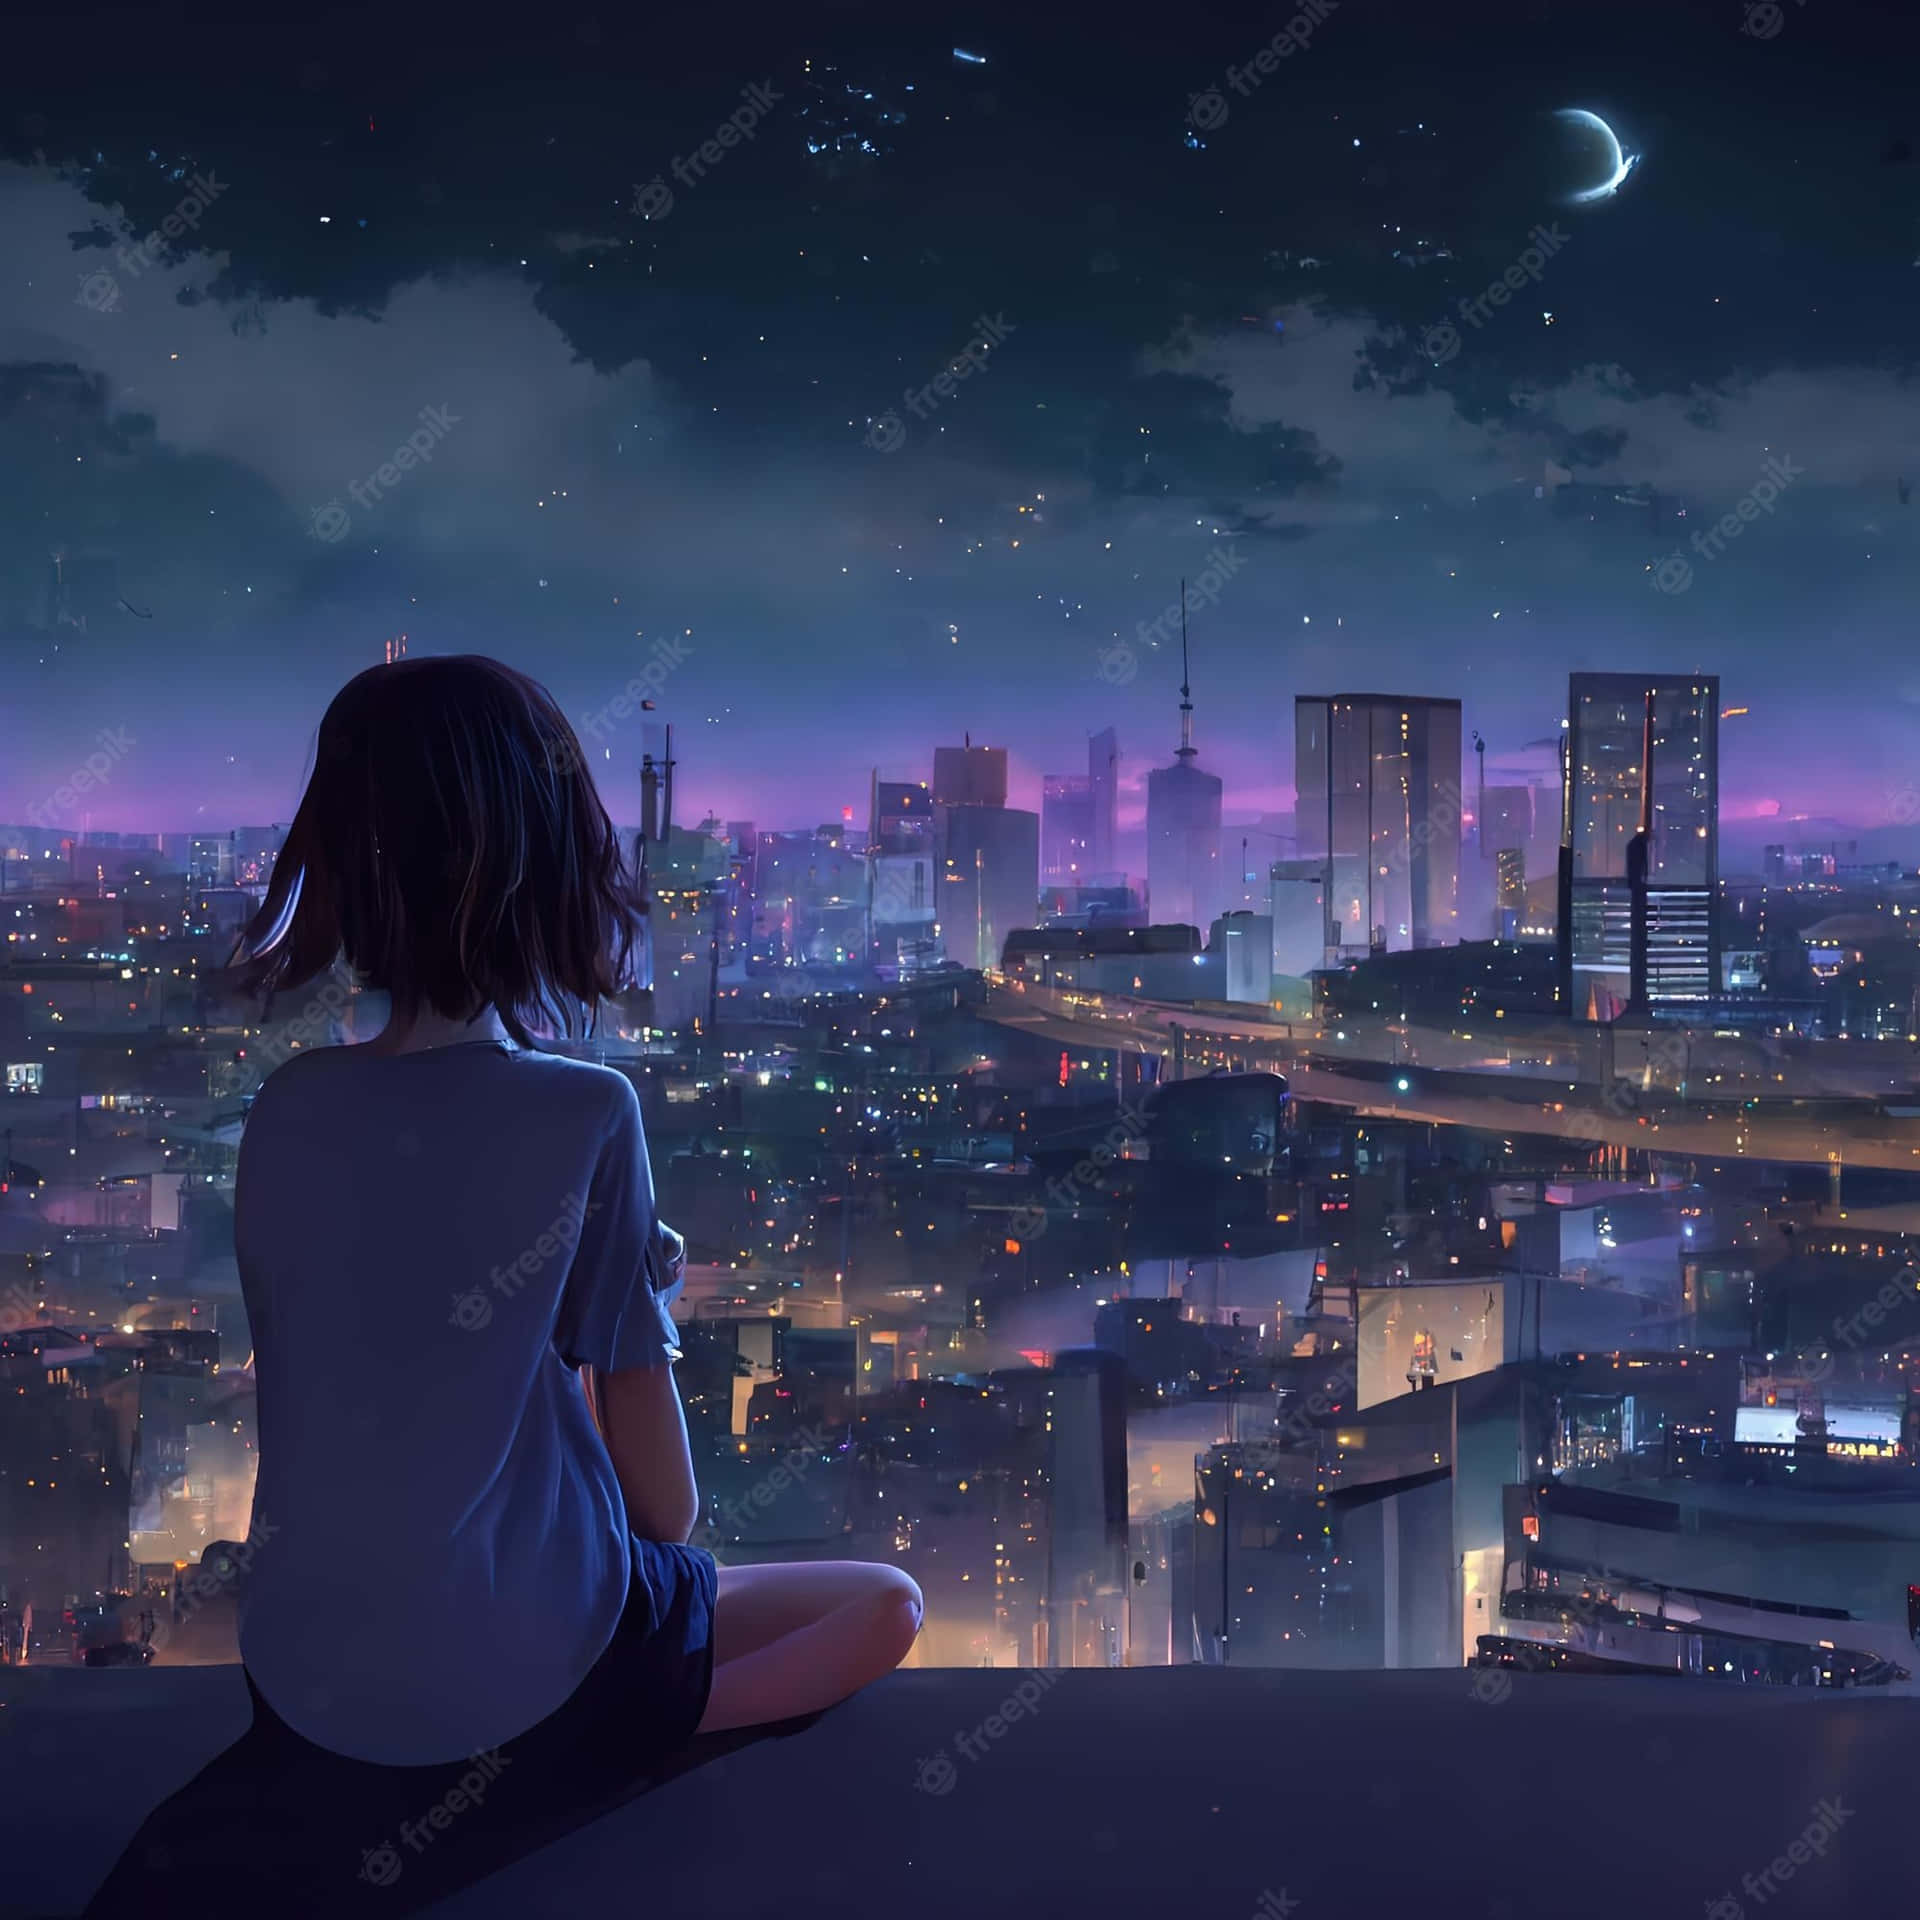 A Girl Looking Out Over The City At Night Wallpaper